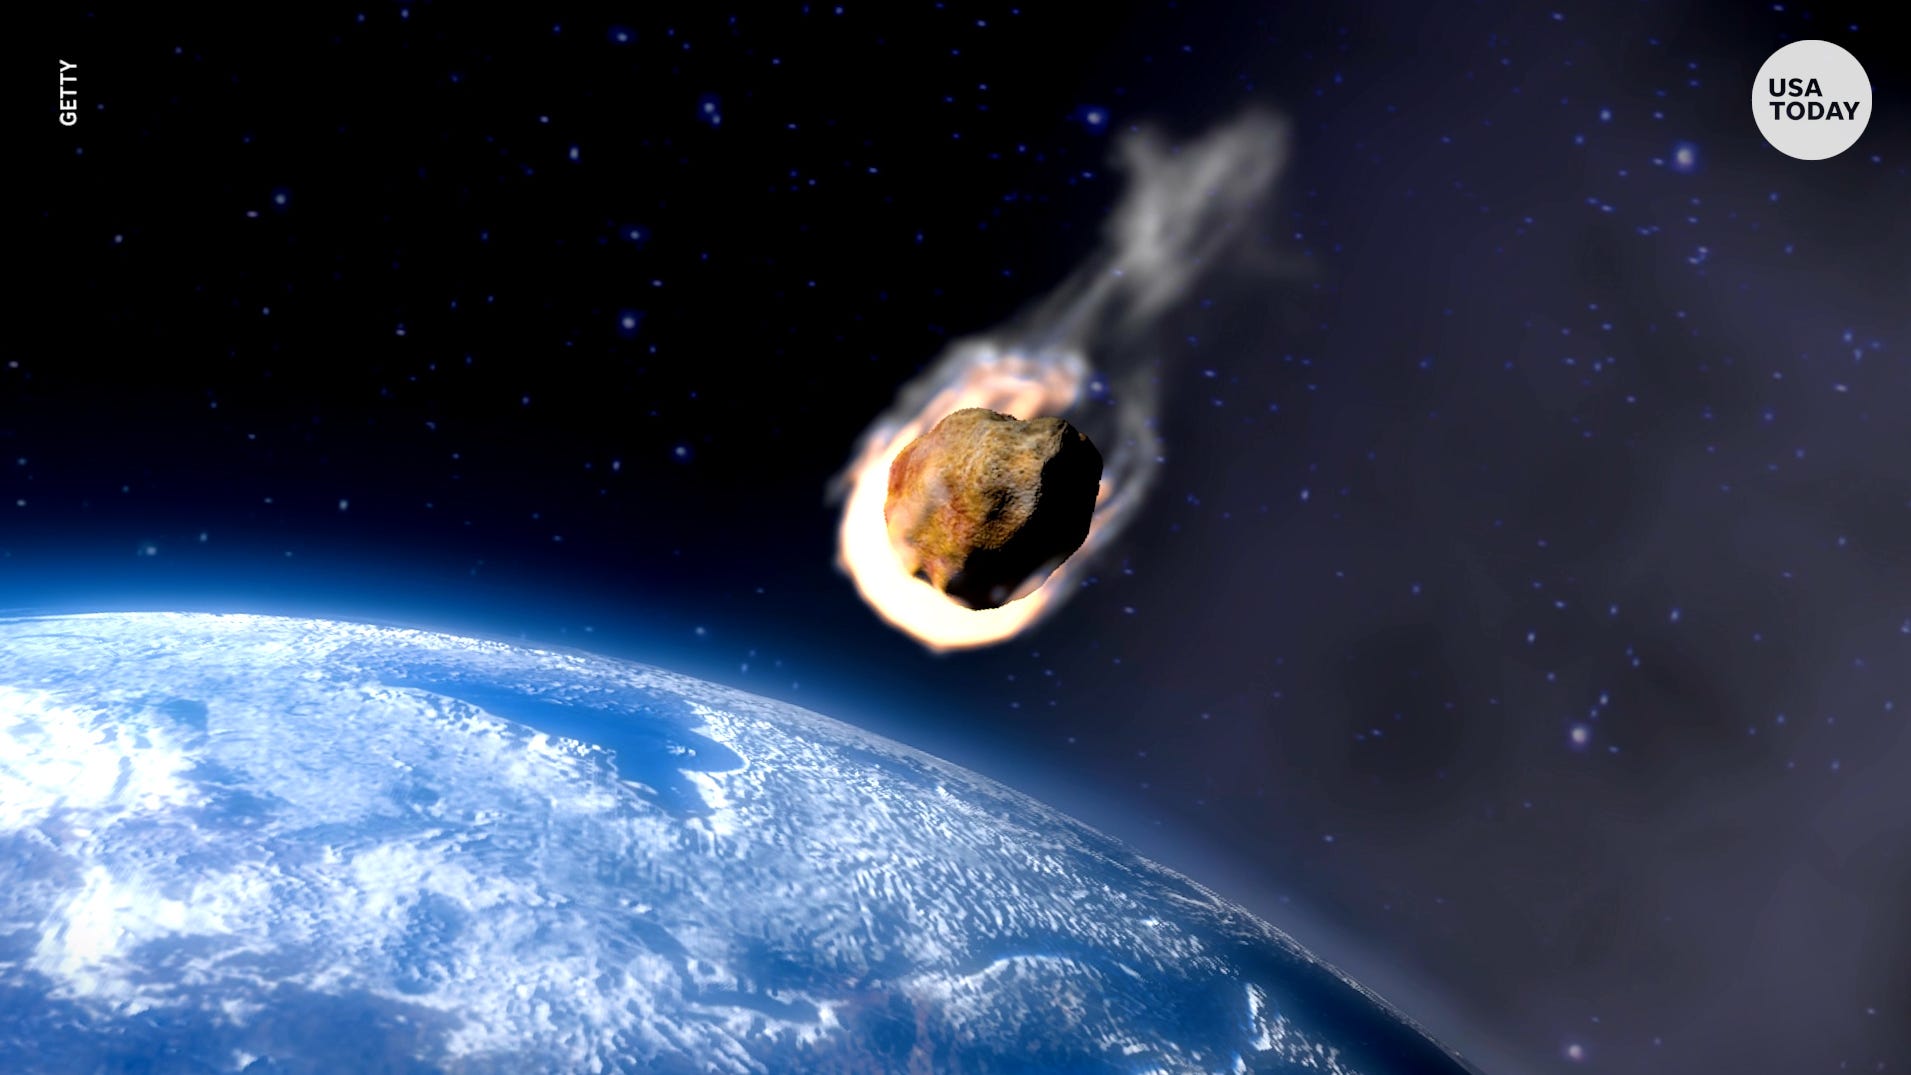 Asteroid the size of a car came 'exceptionally close' to hitting Earth